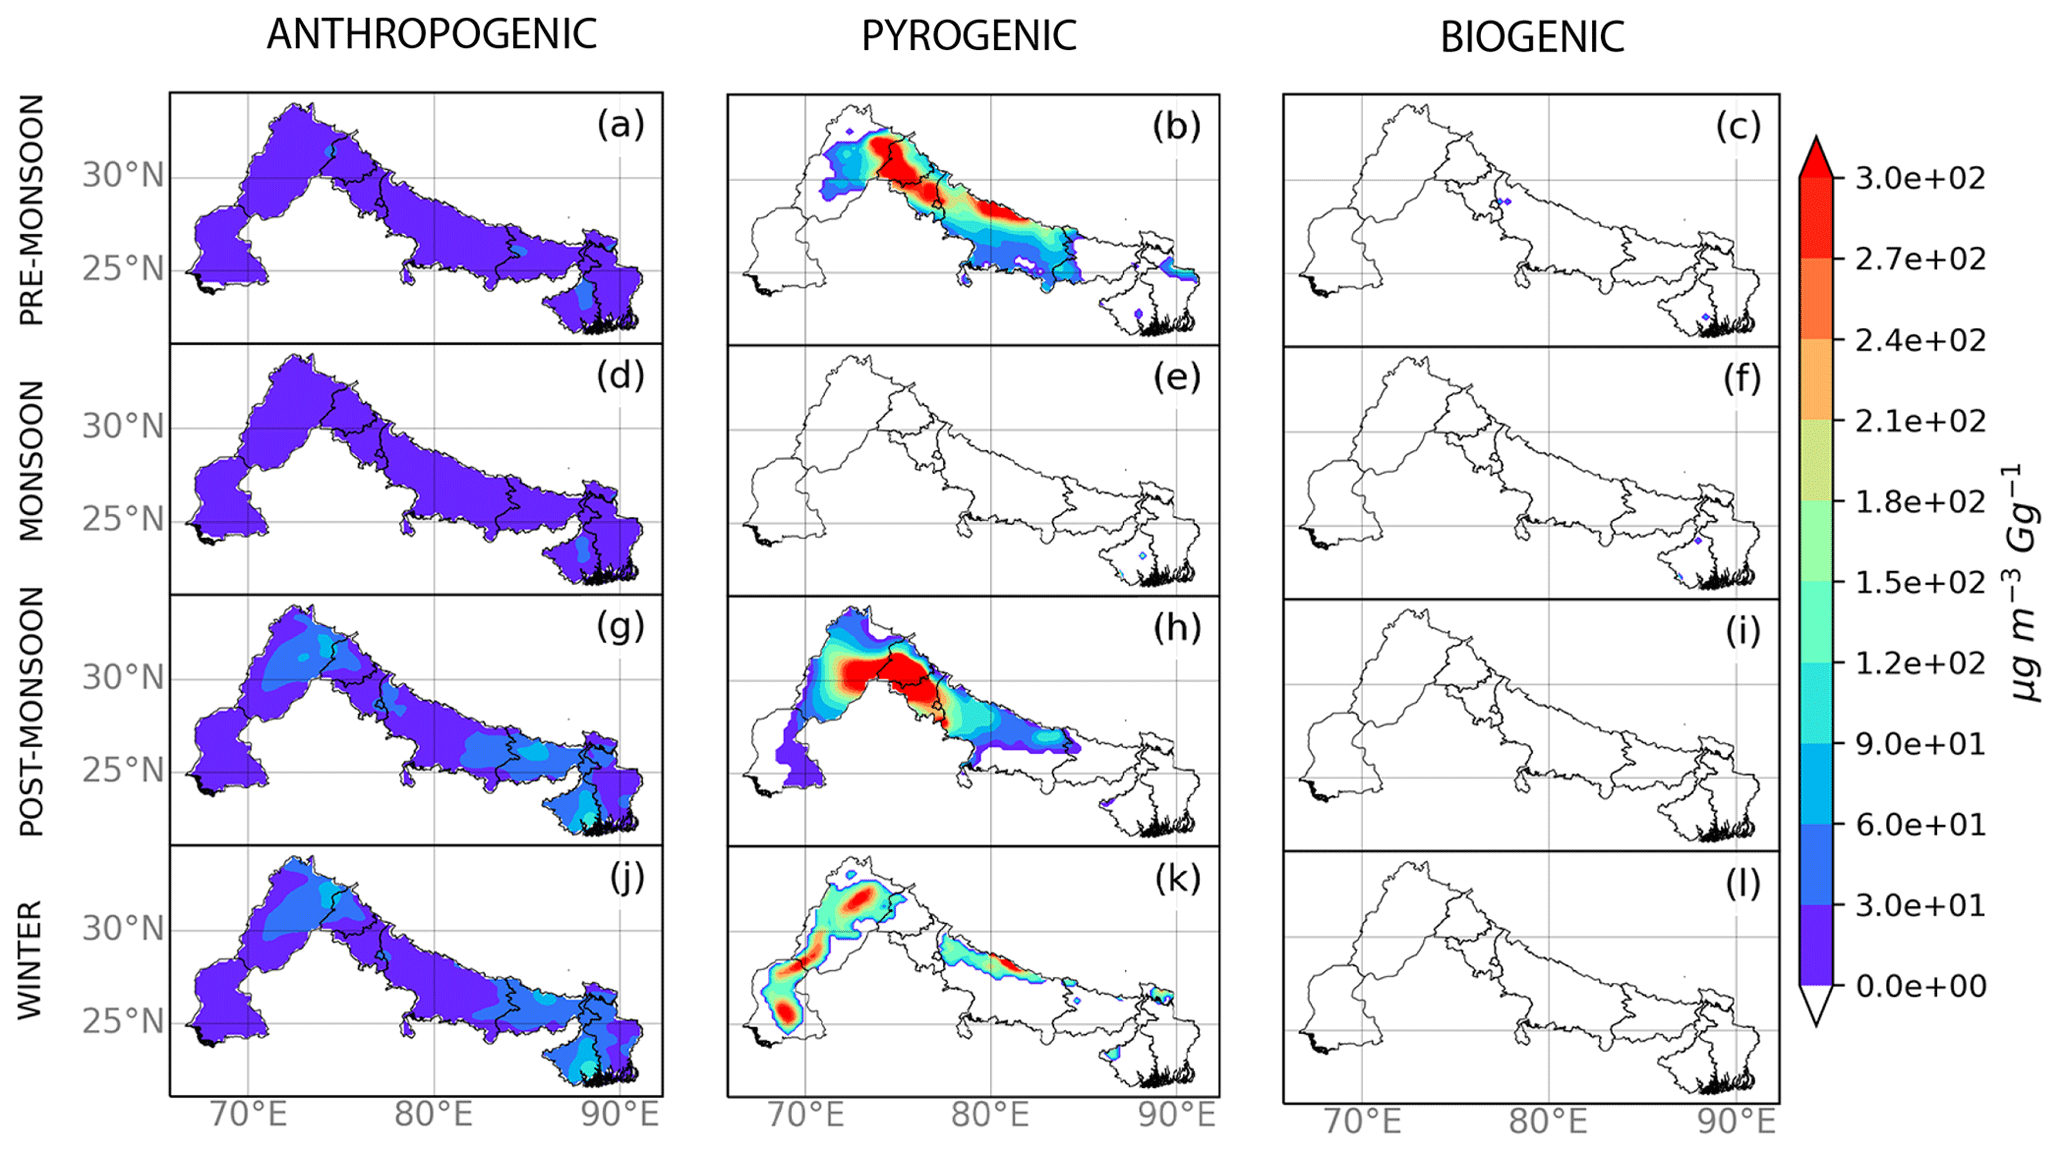 The flood-drought syndrome and ecological degradation of the Indo-Gangetic  Plains of South Asia